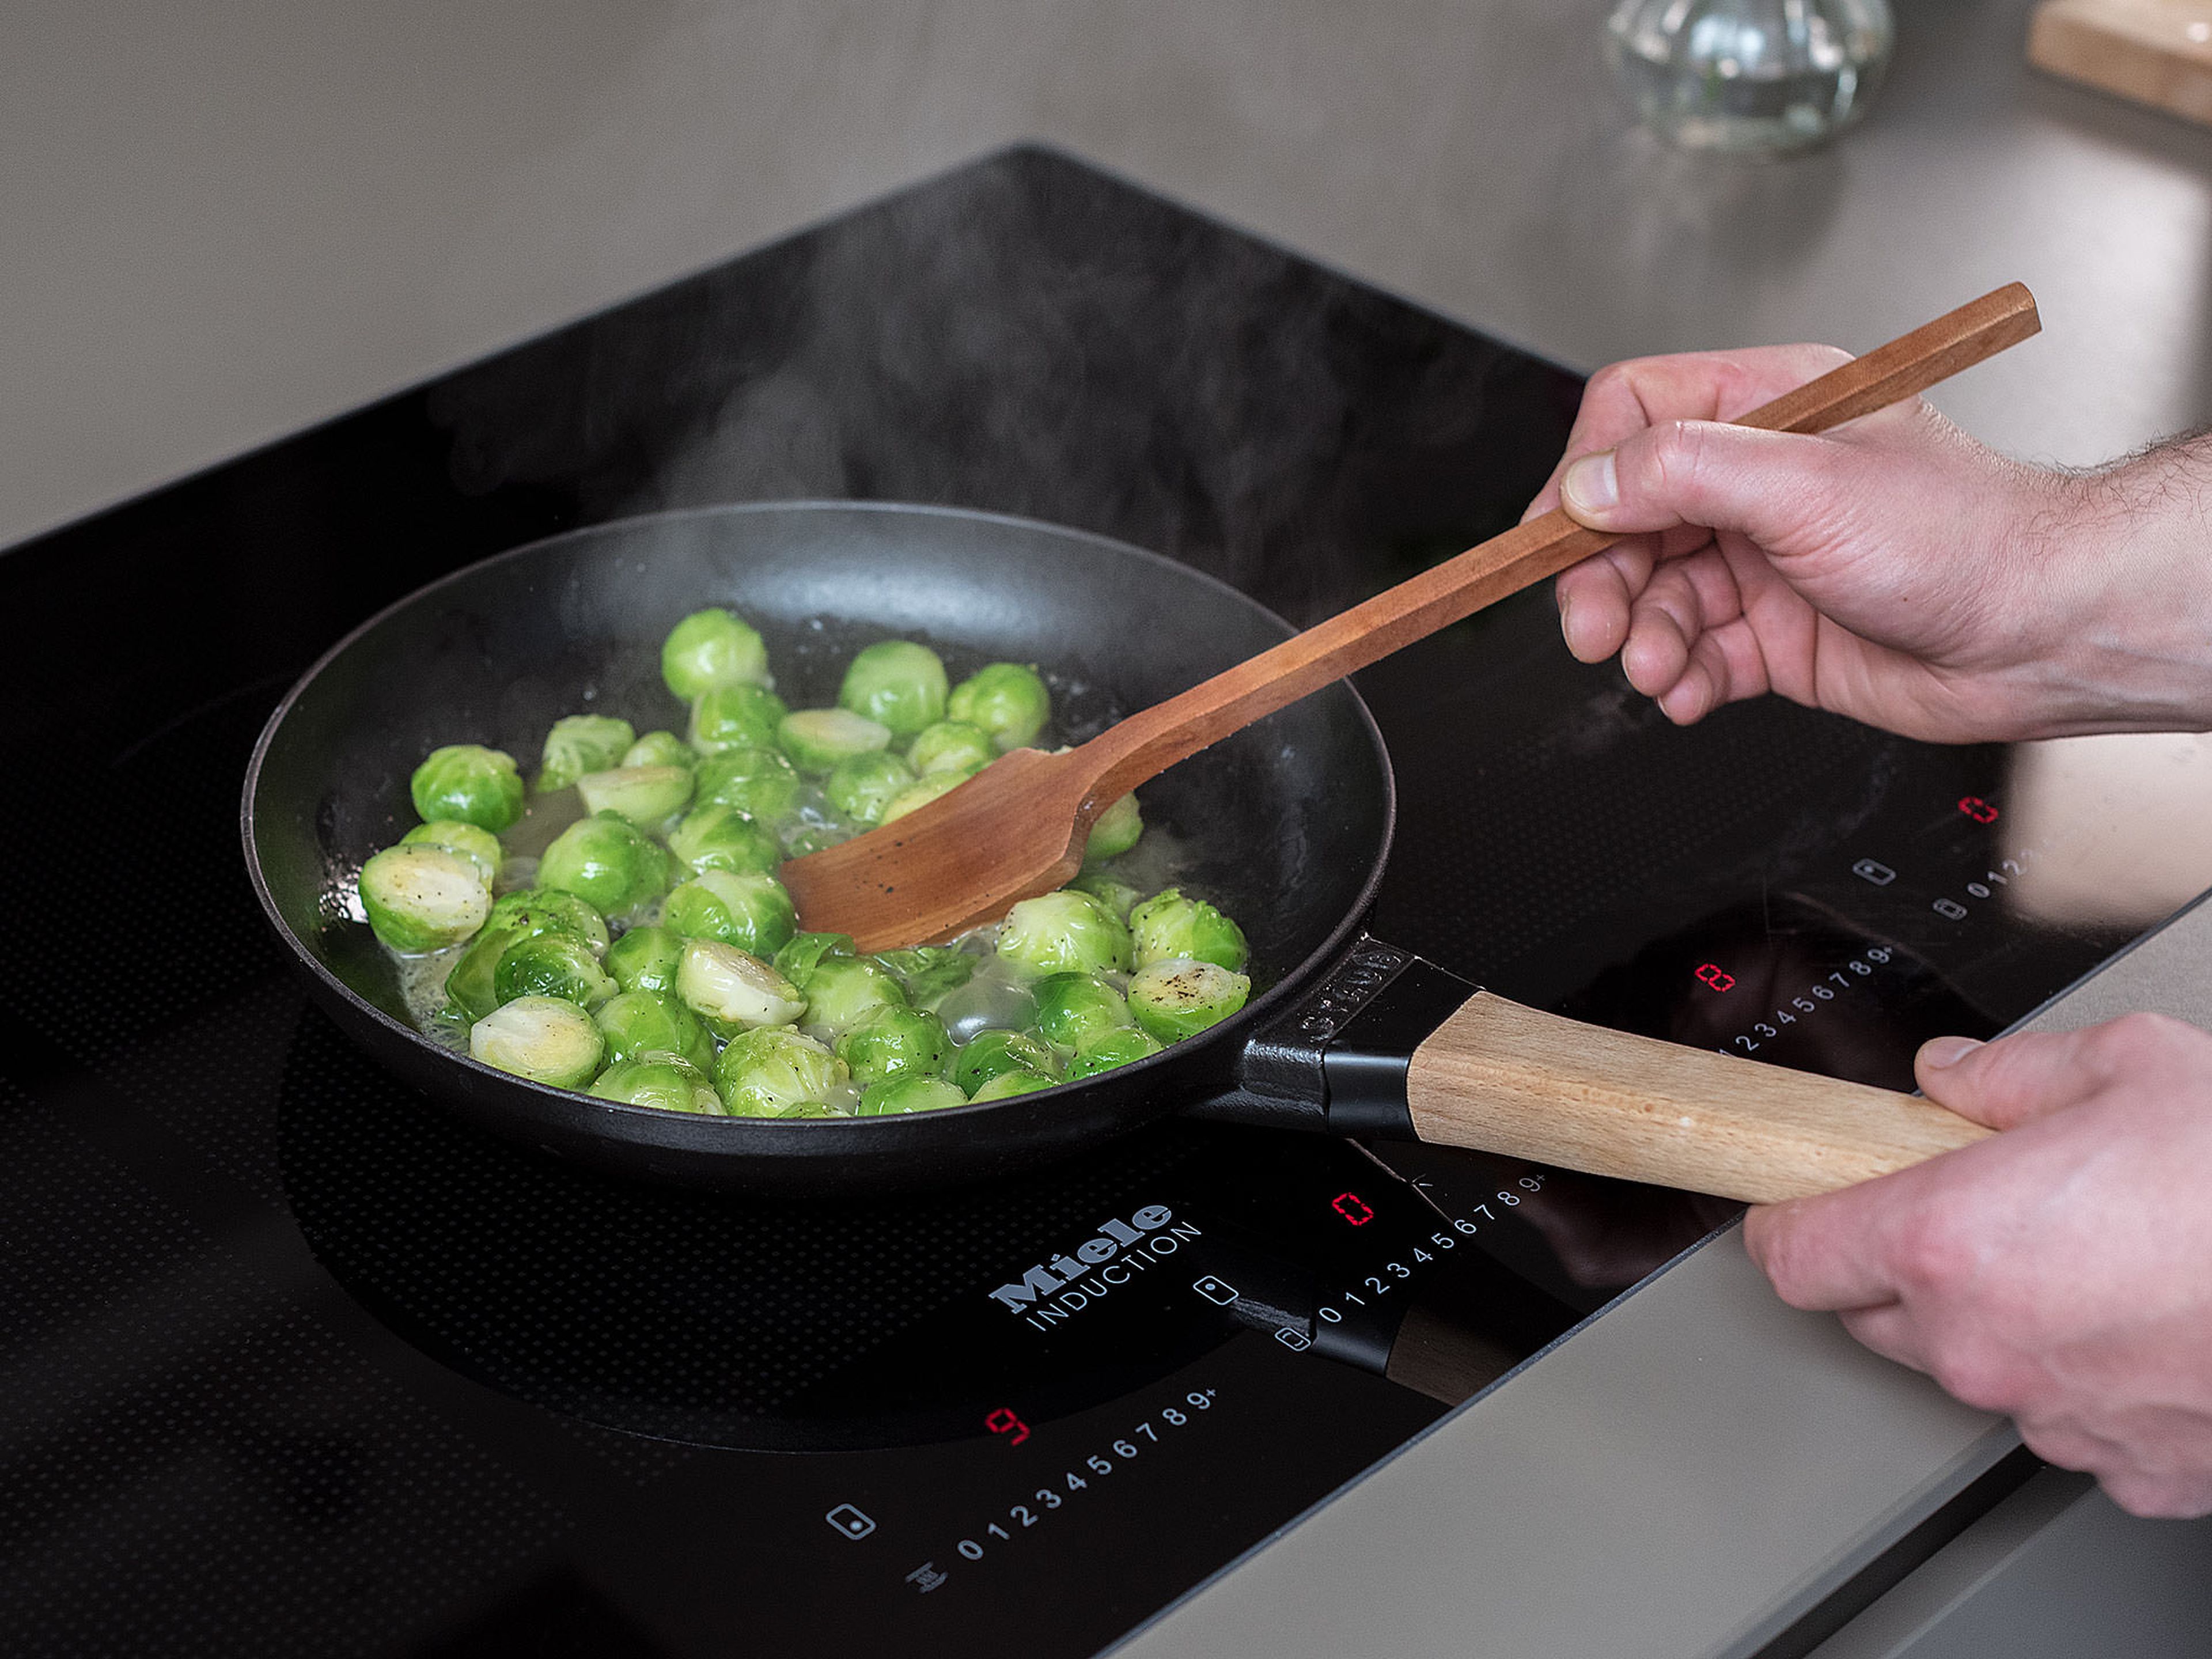 Melt butter in a frying pan over medium heat. Add honey and Brussels sprouts. Season with salt and pepper. Sauté Brussels sprouts for approx. 5 min., then set aside.